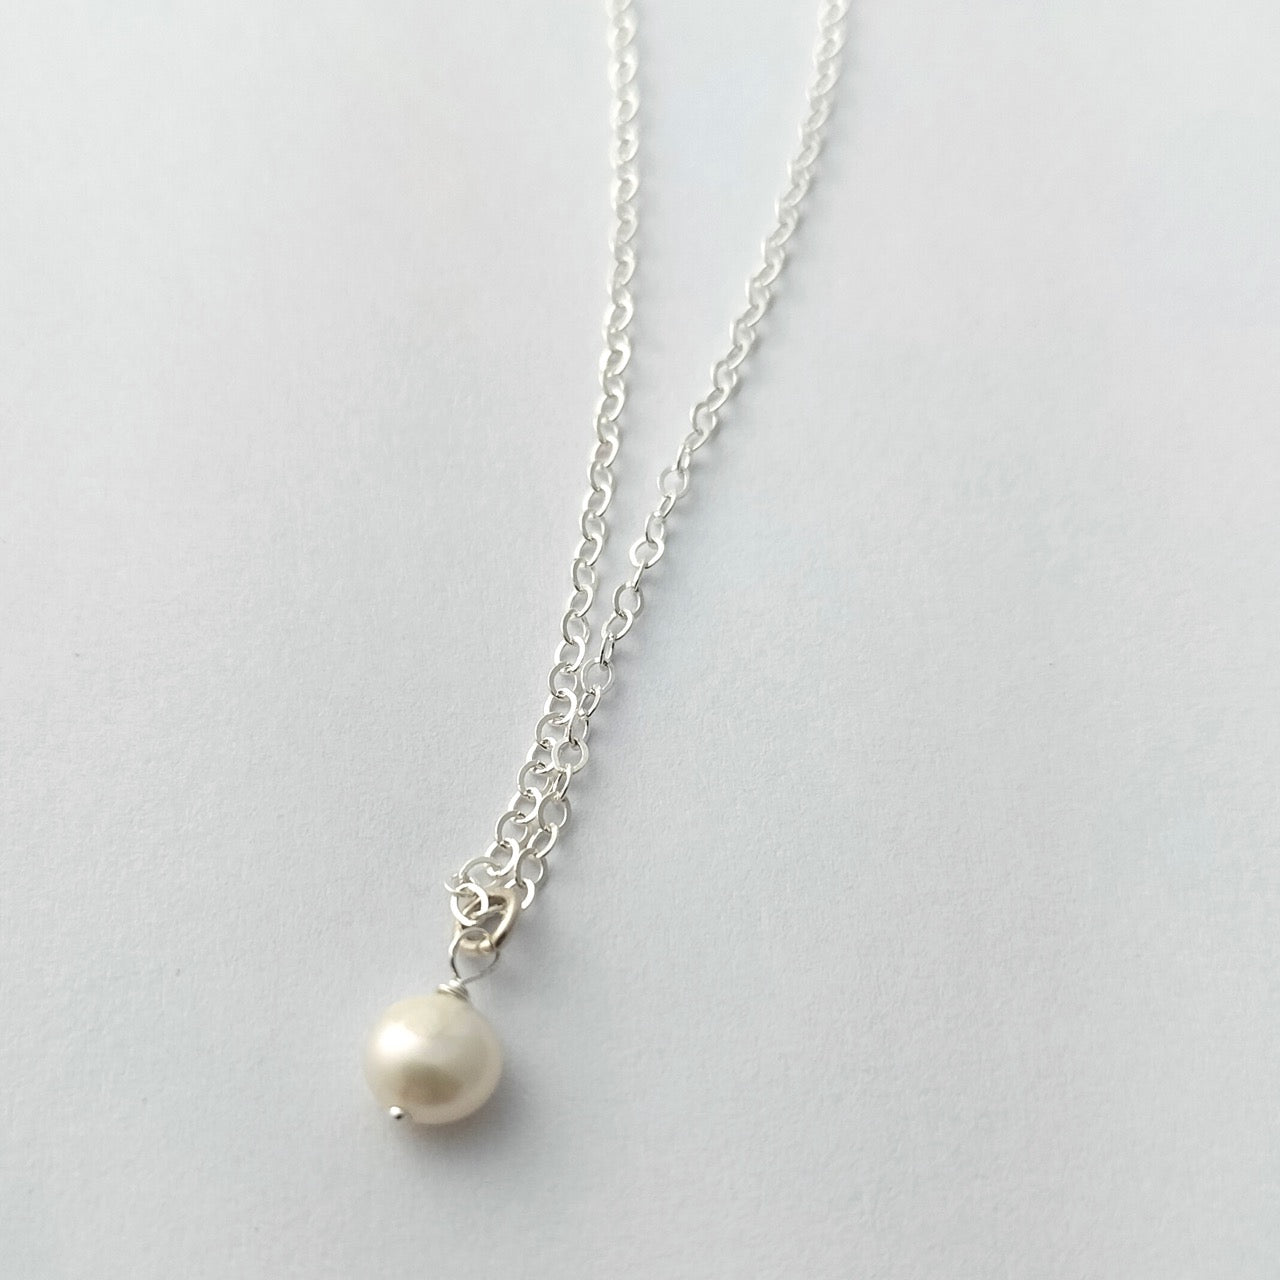 Small pearl necklace with silver chain